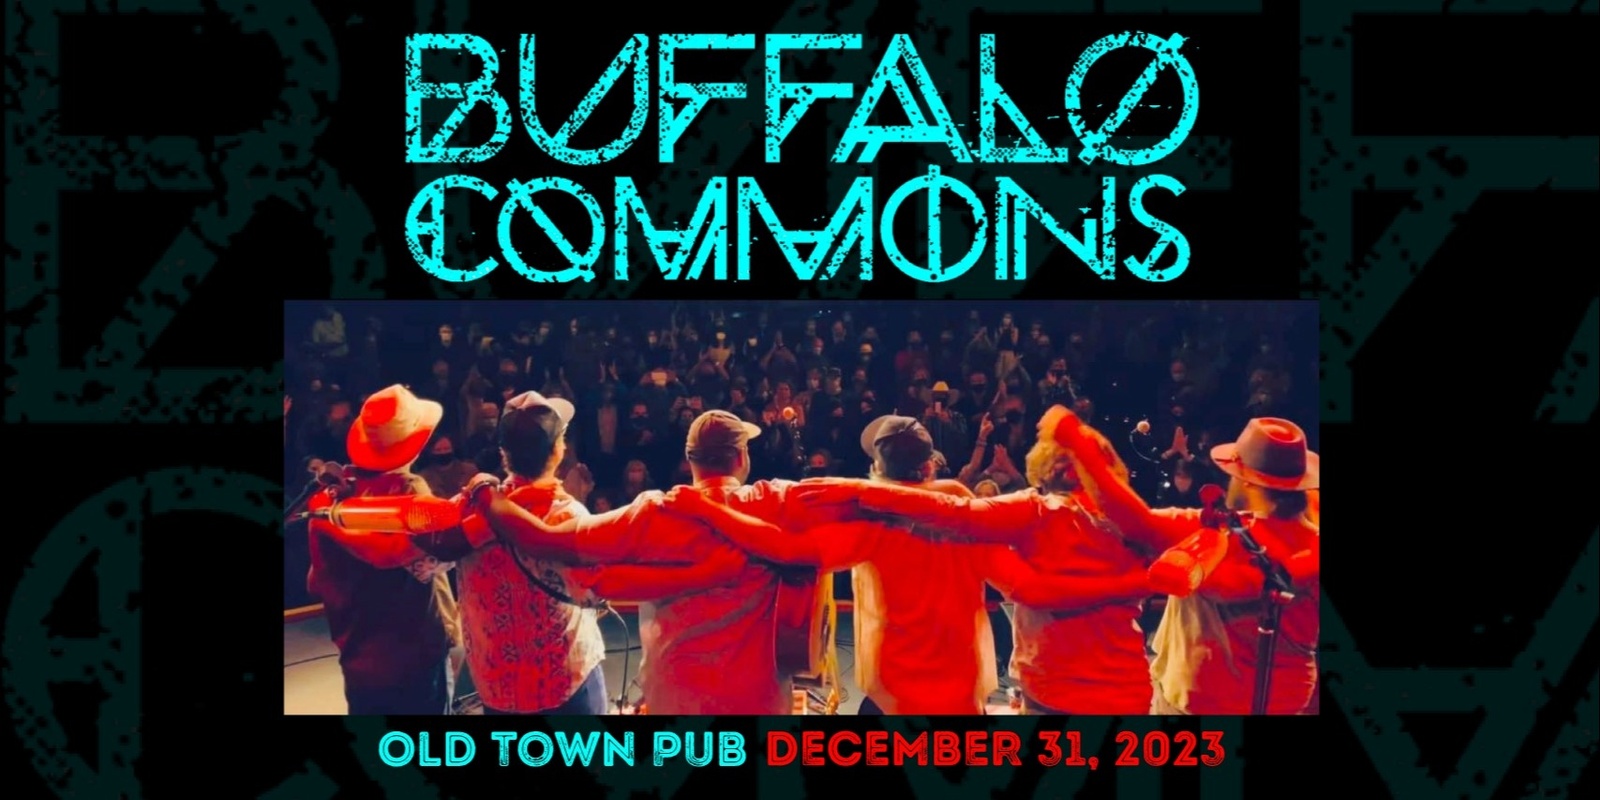 Banner image for Buffalo Commons New Year's Eve